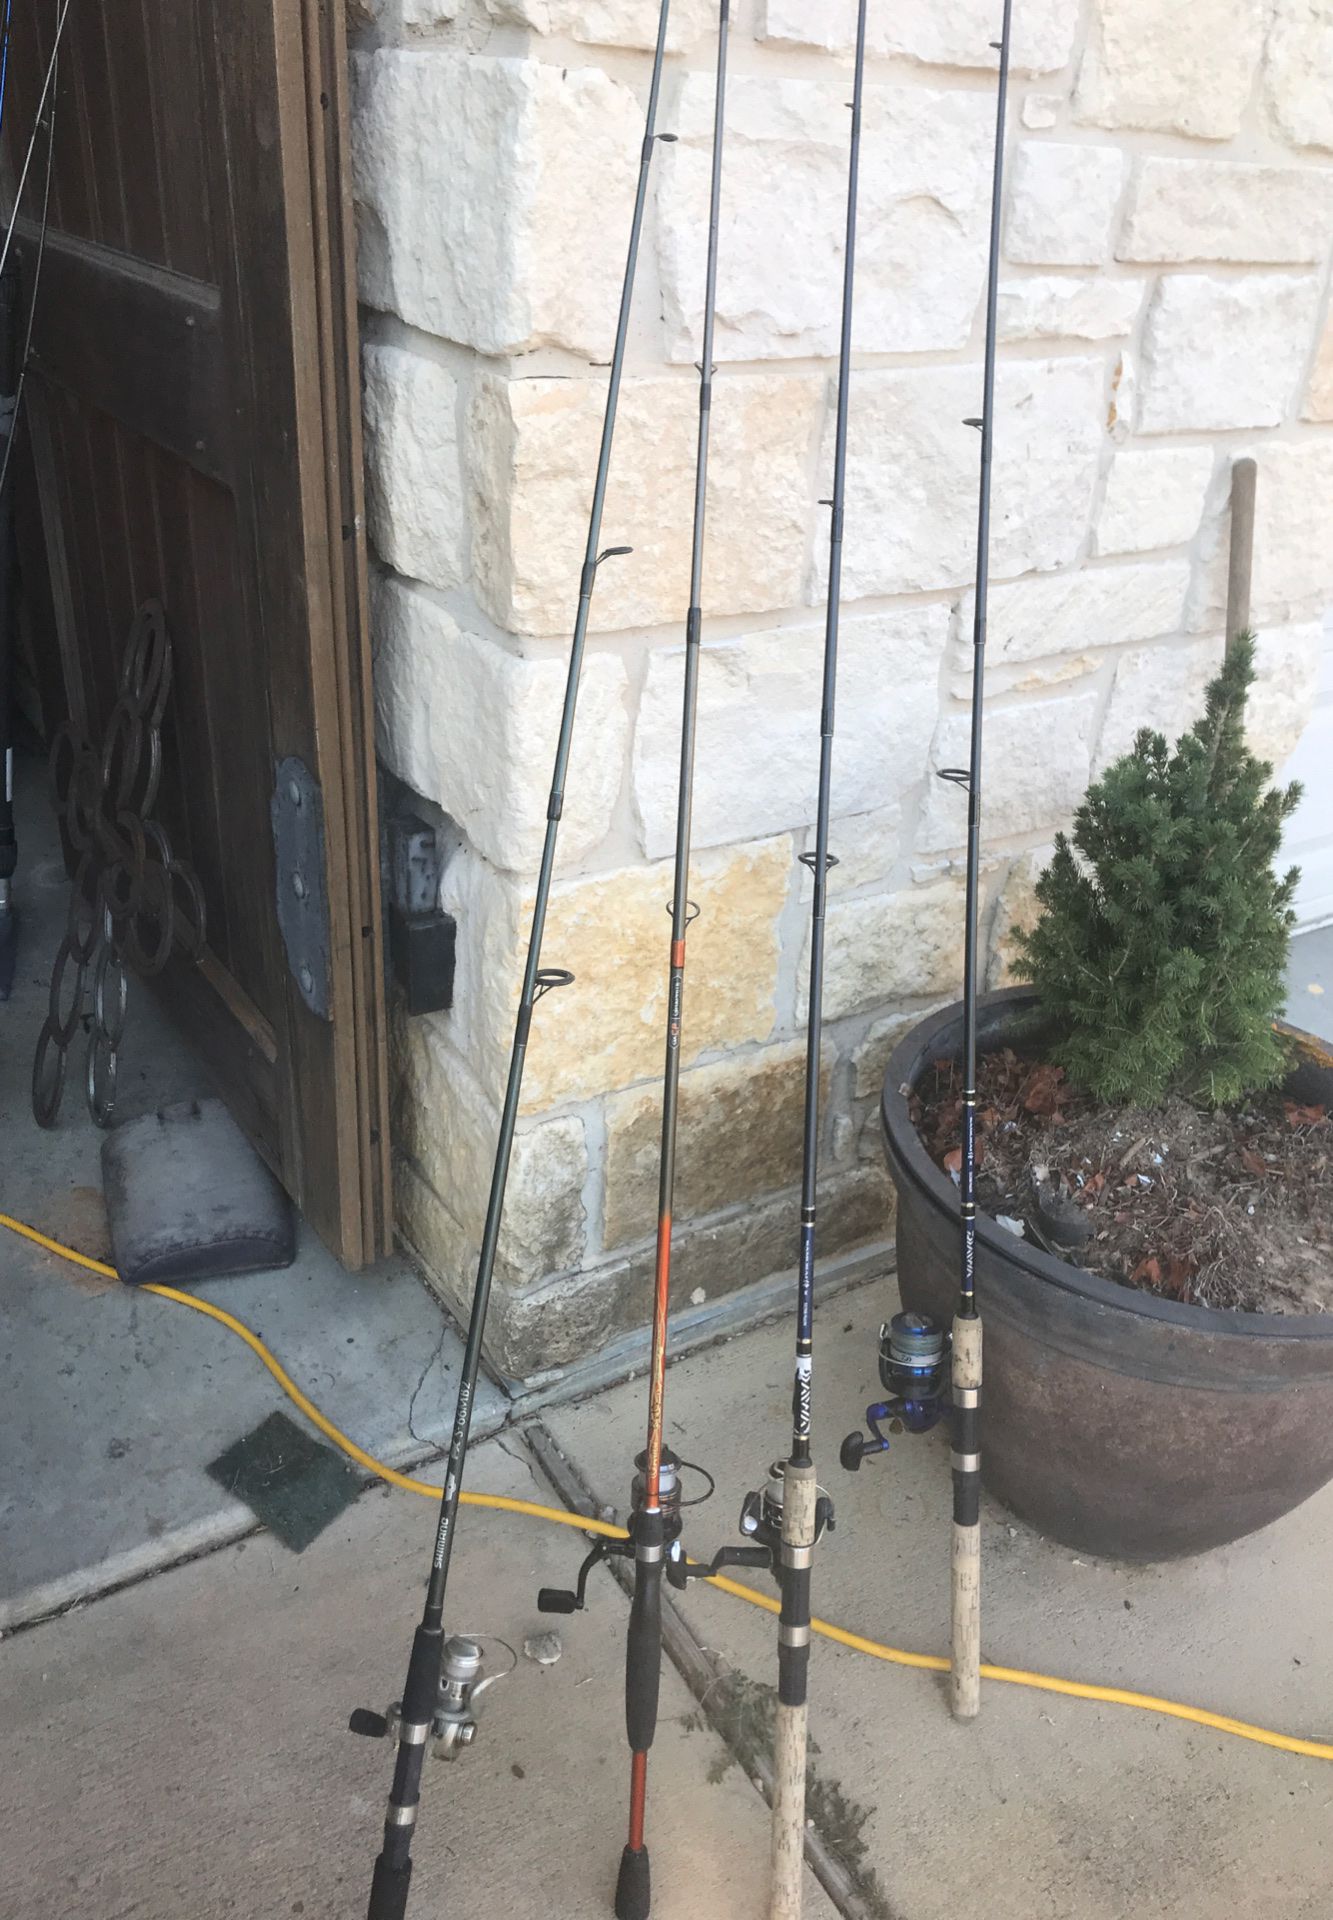 Spin cast fishing poles